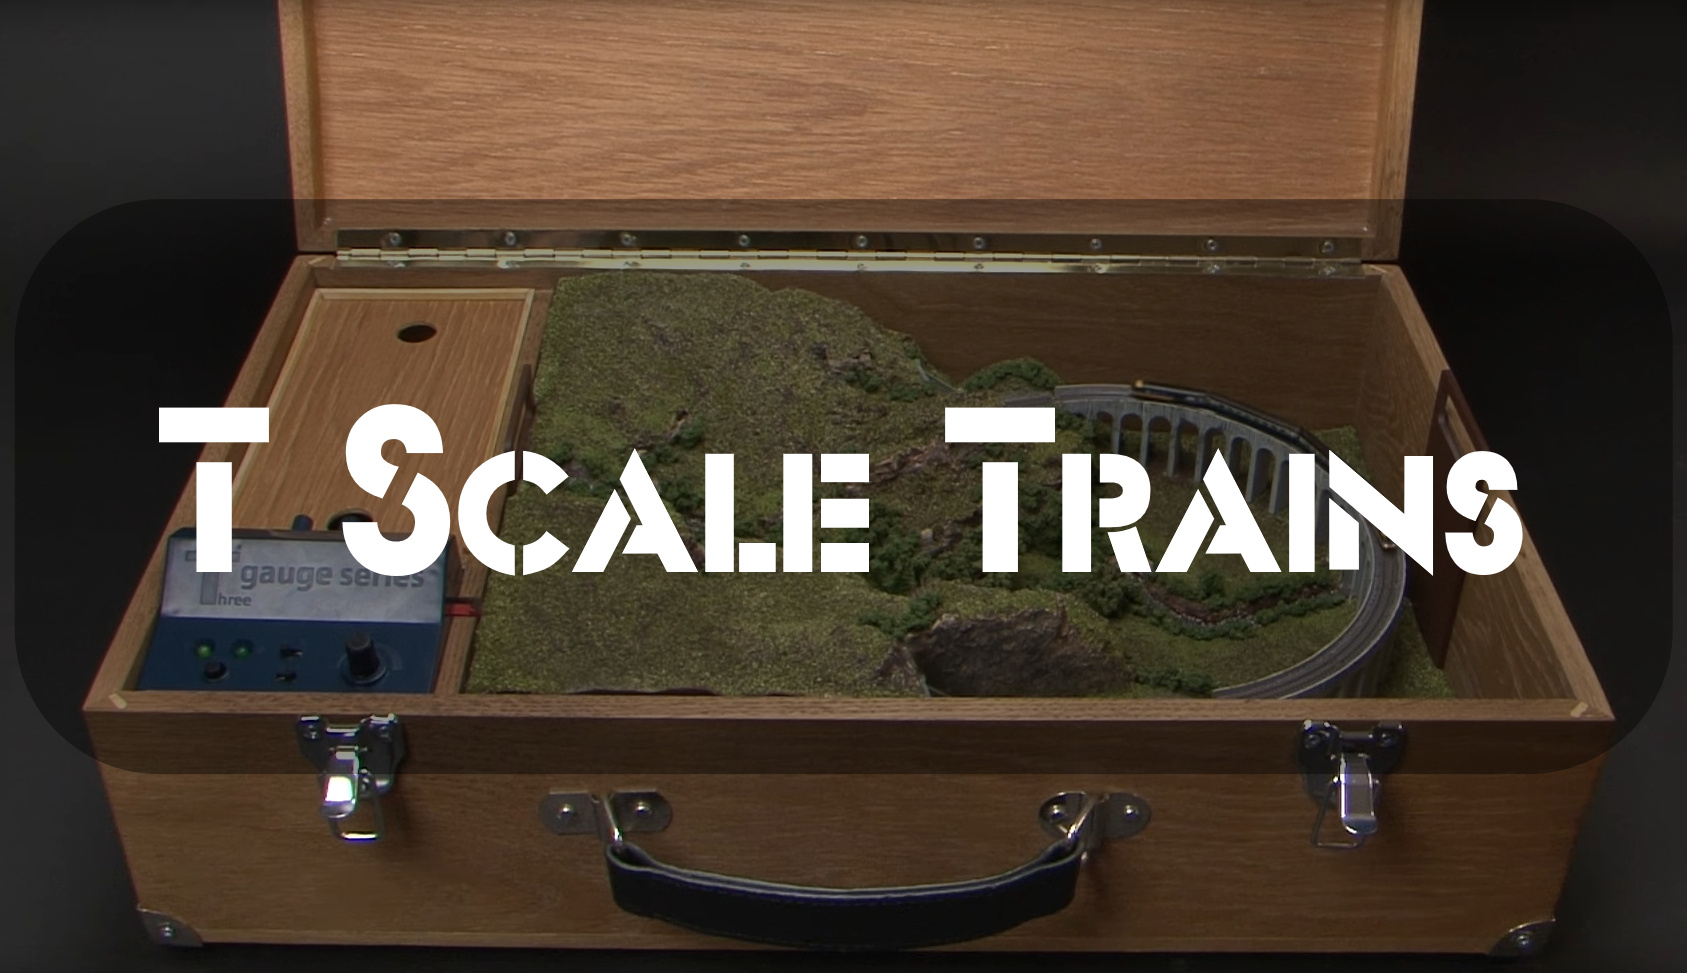 All Aboard The T Scale Trains: Fun for the Whole Family!